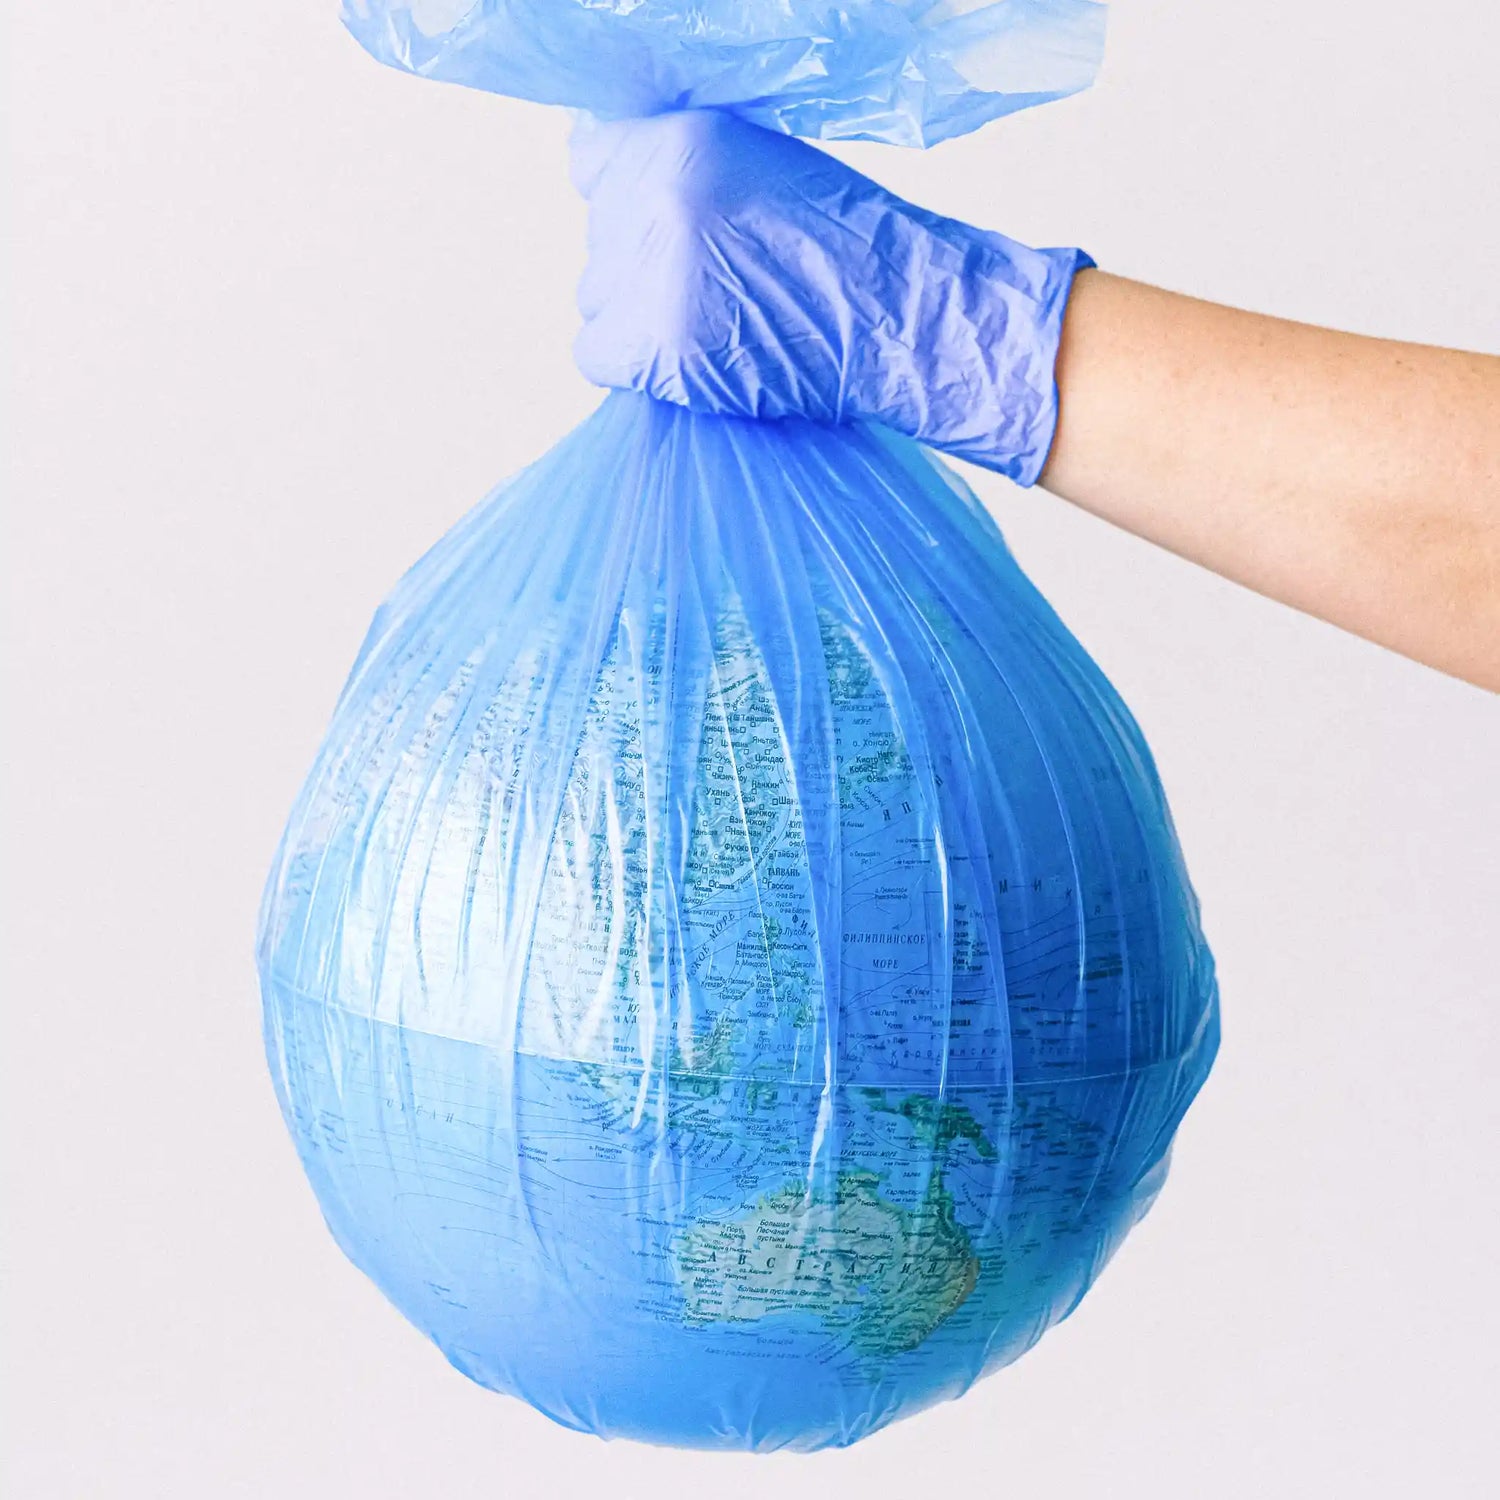 Globe wrapped in plastic bin bag held up by hand in glove